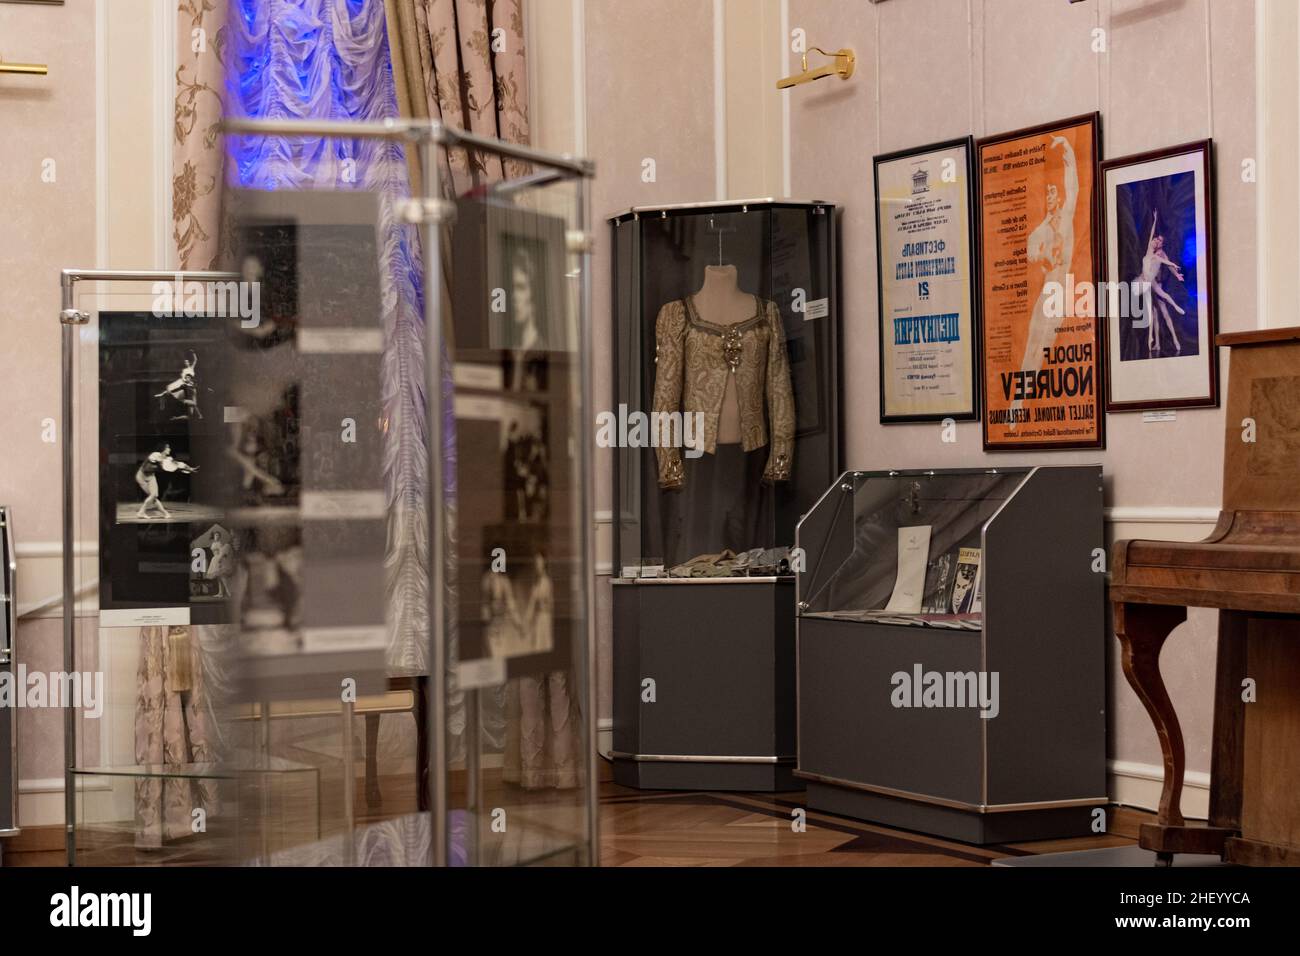 The world-famous Tatar ballet dancer Rudolf Nureyev's museum at the Bashkir State Opera and Ballet Theatre. His personal belongings, costumes. Stock Photo